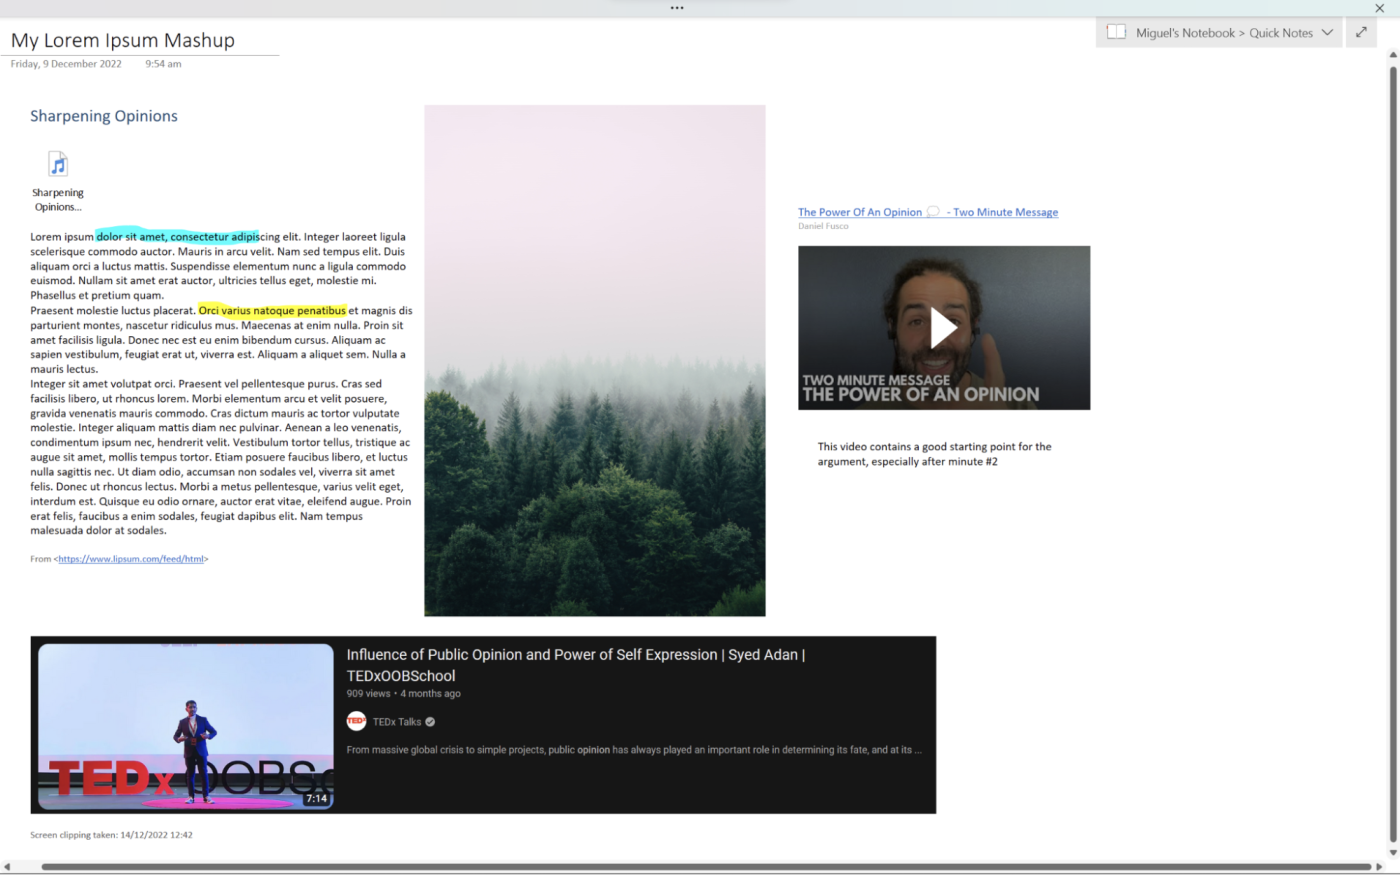 Image, videos, text, and highlights in OneNote